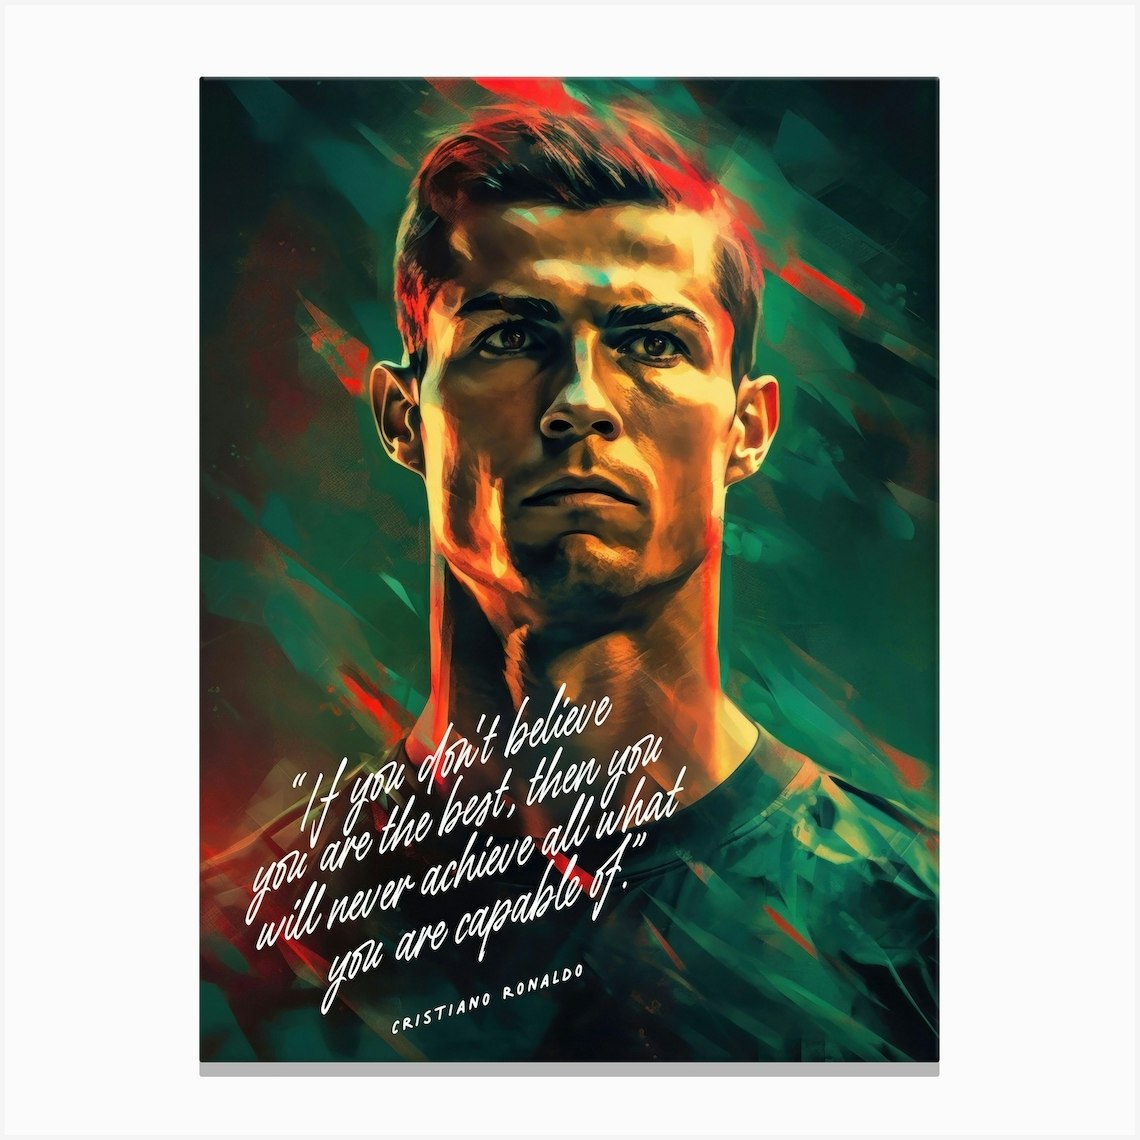 Cristiano Ronaldo Art Quote Canvas Print by Lootprint - Fy